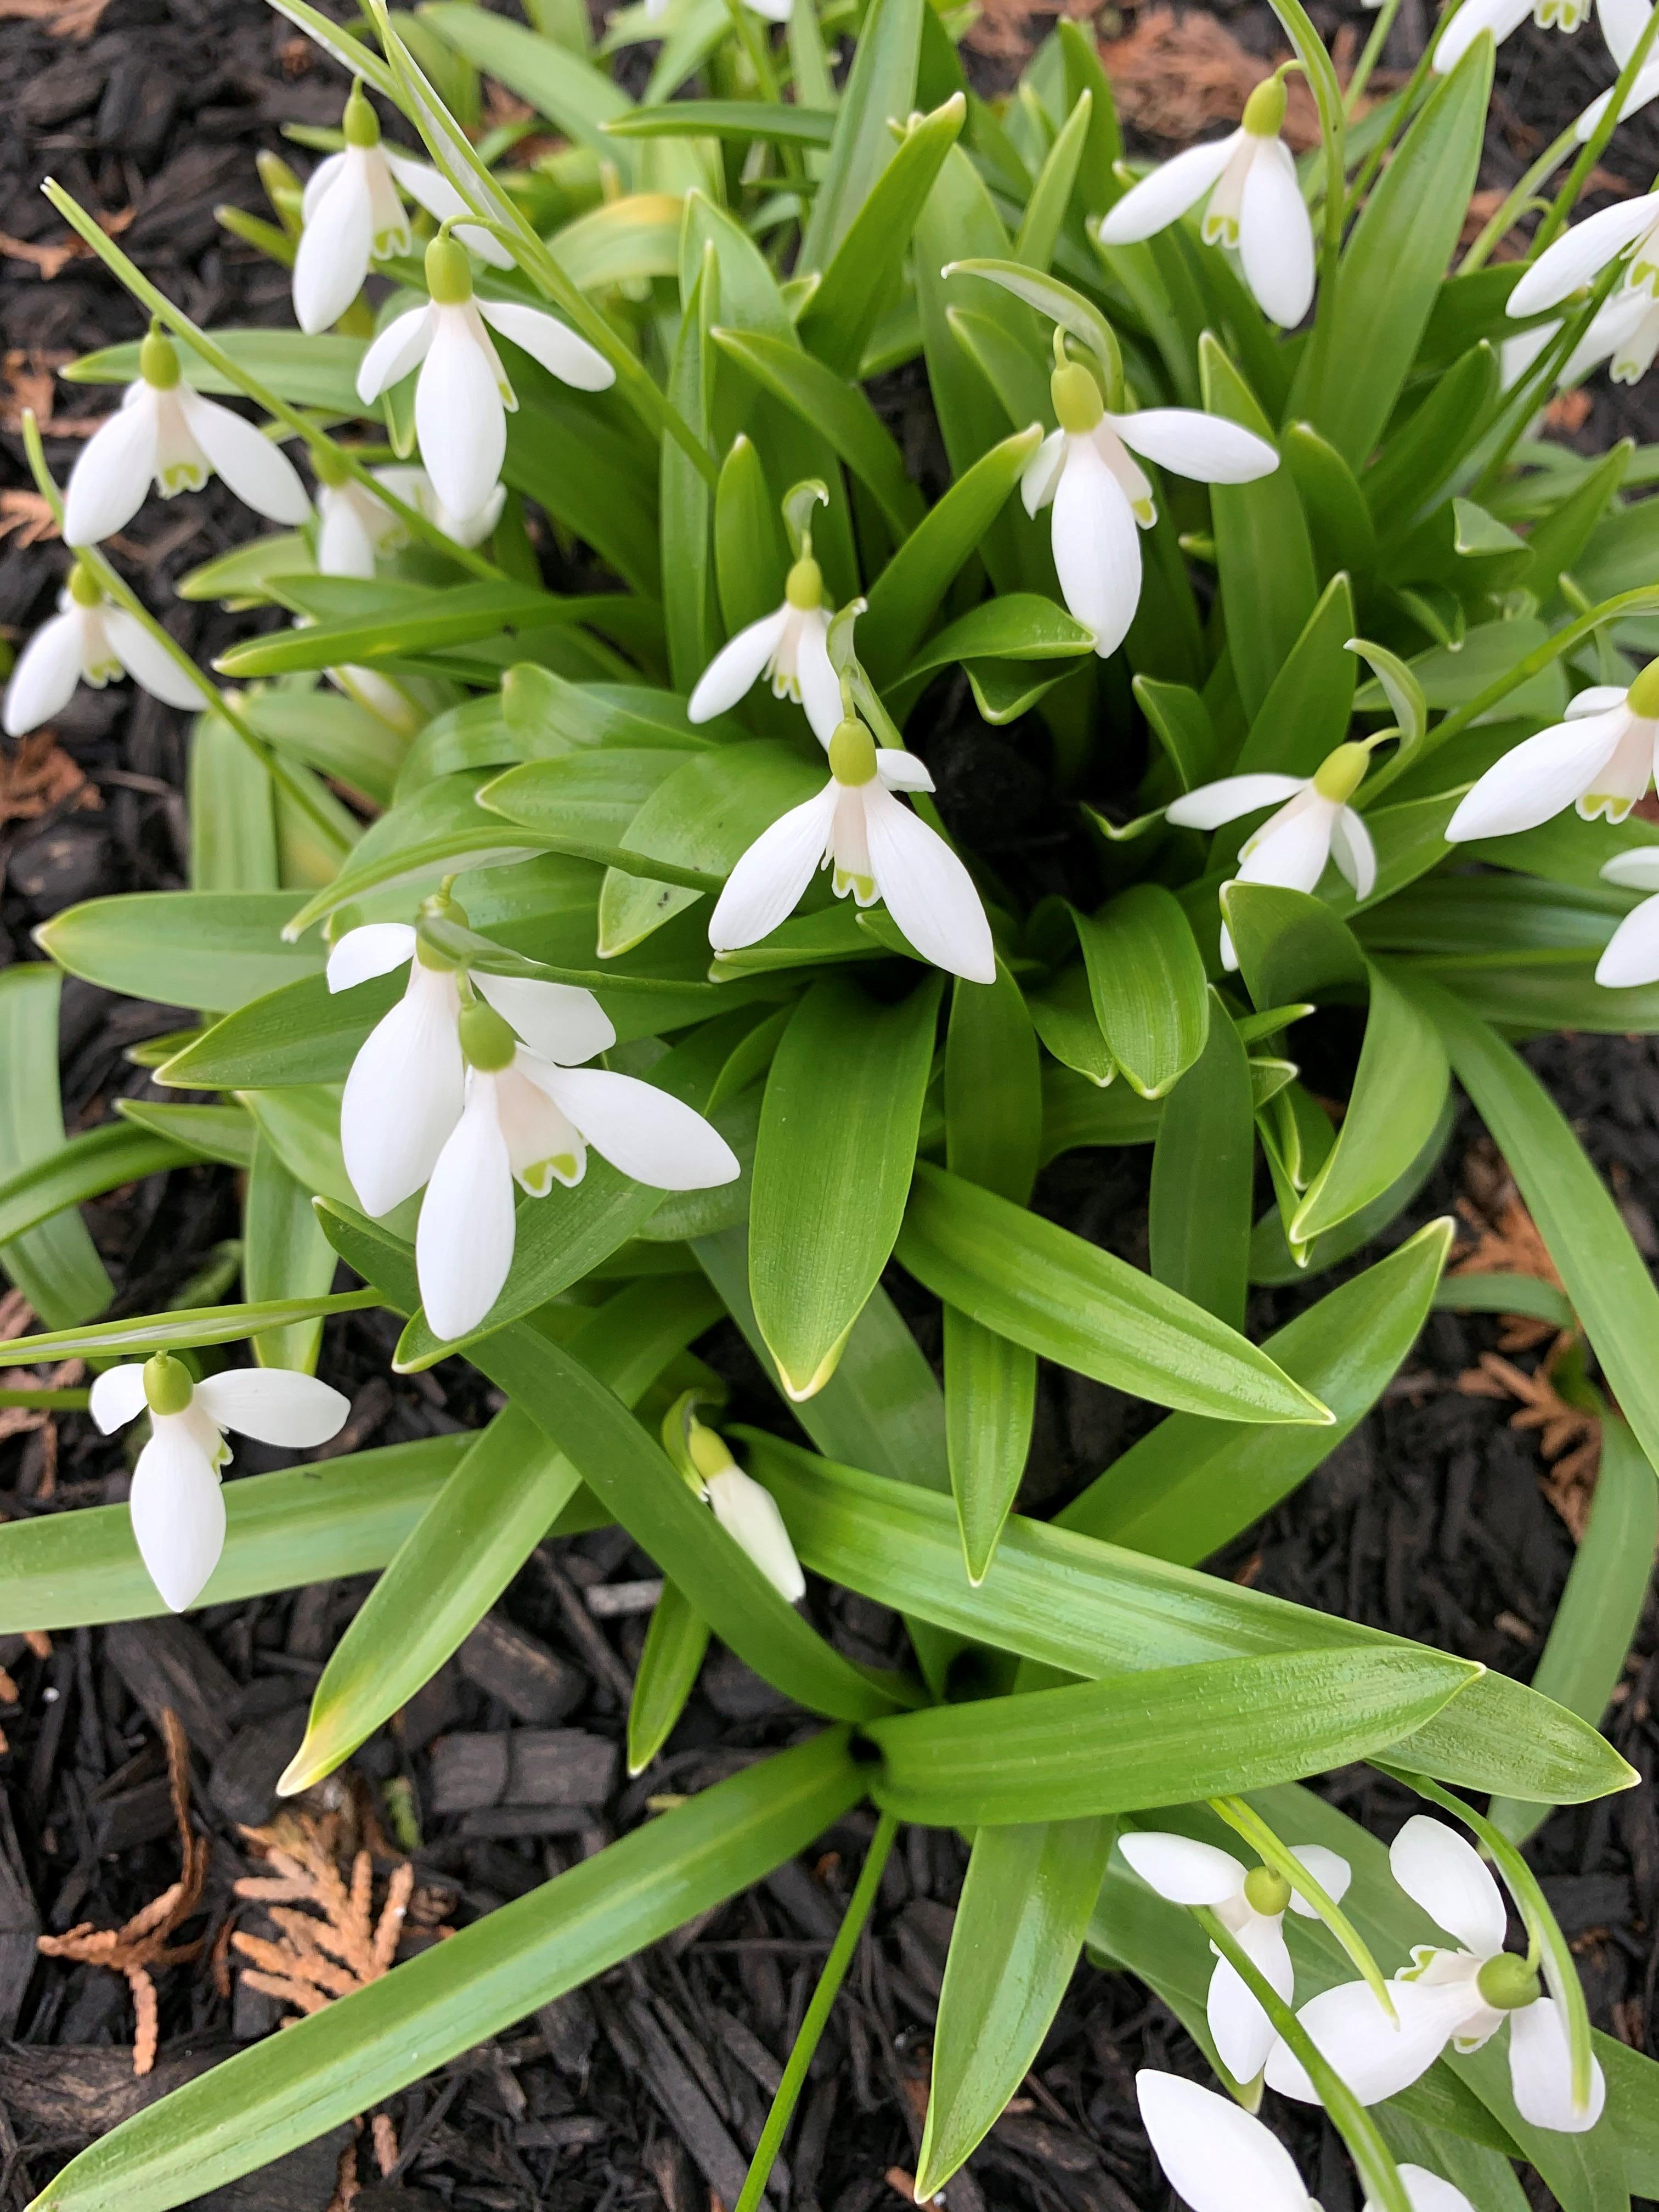 Galanthus 'Elwessi' - Snowdrops (Shipping begins Fall 2021) from Leo Berbee Bulb Company